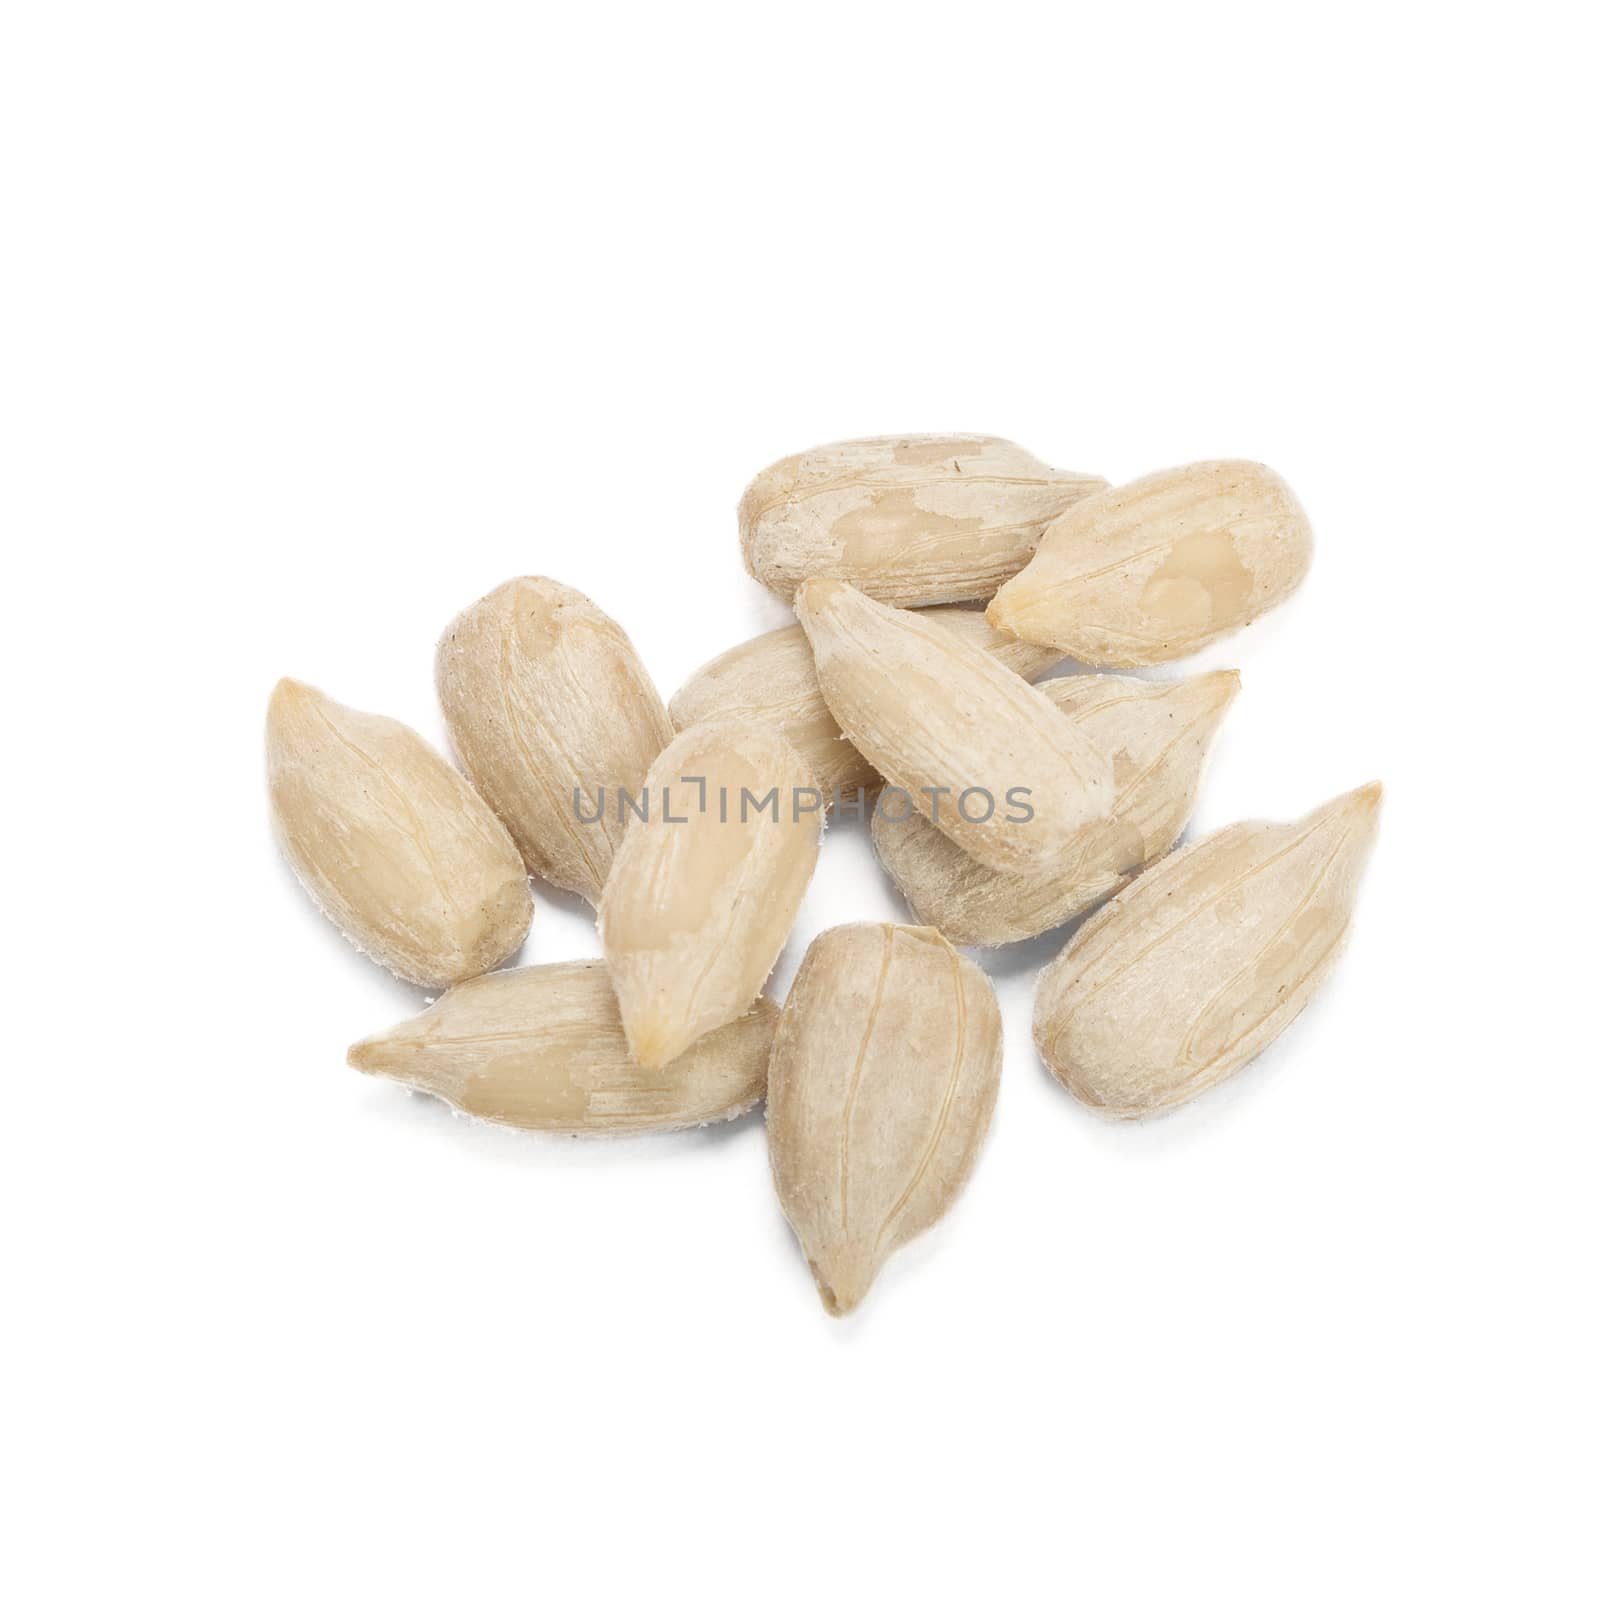 Pile of sunflower seeds isolated on white background.